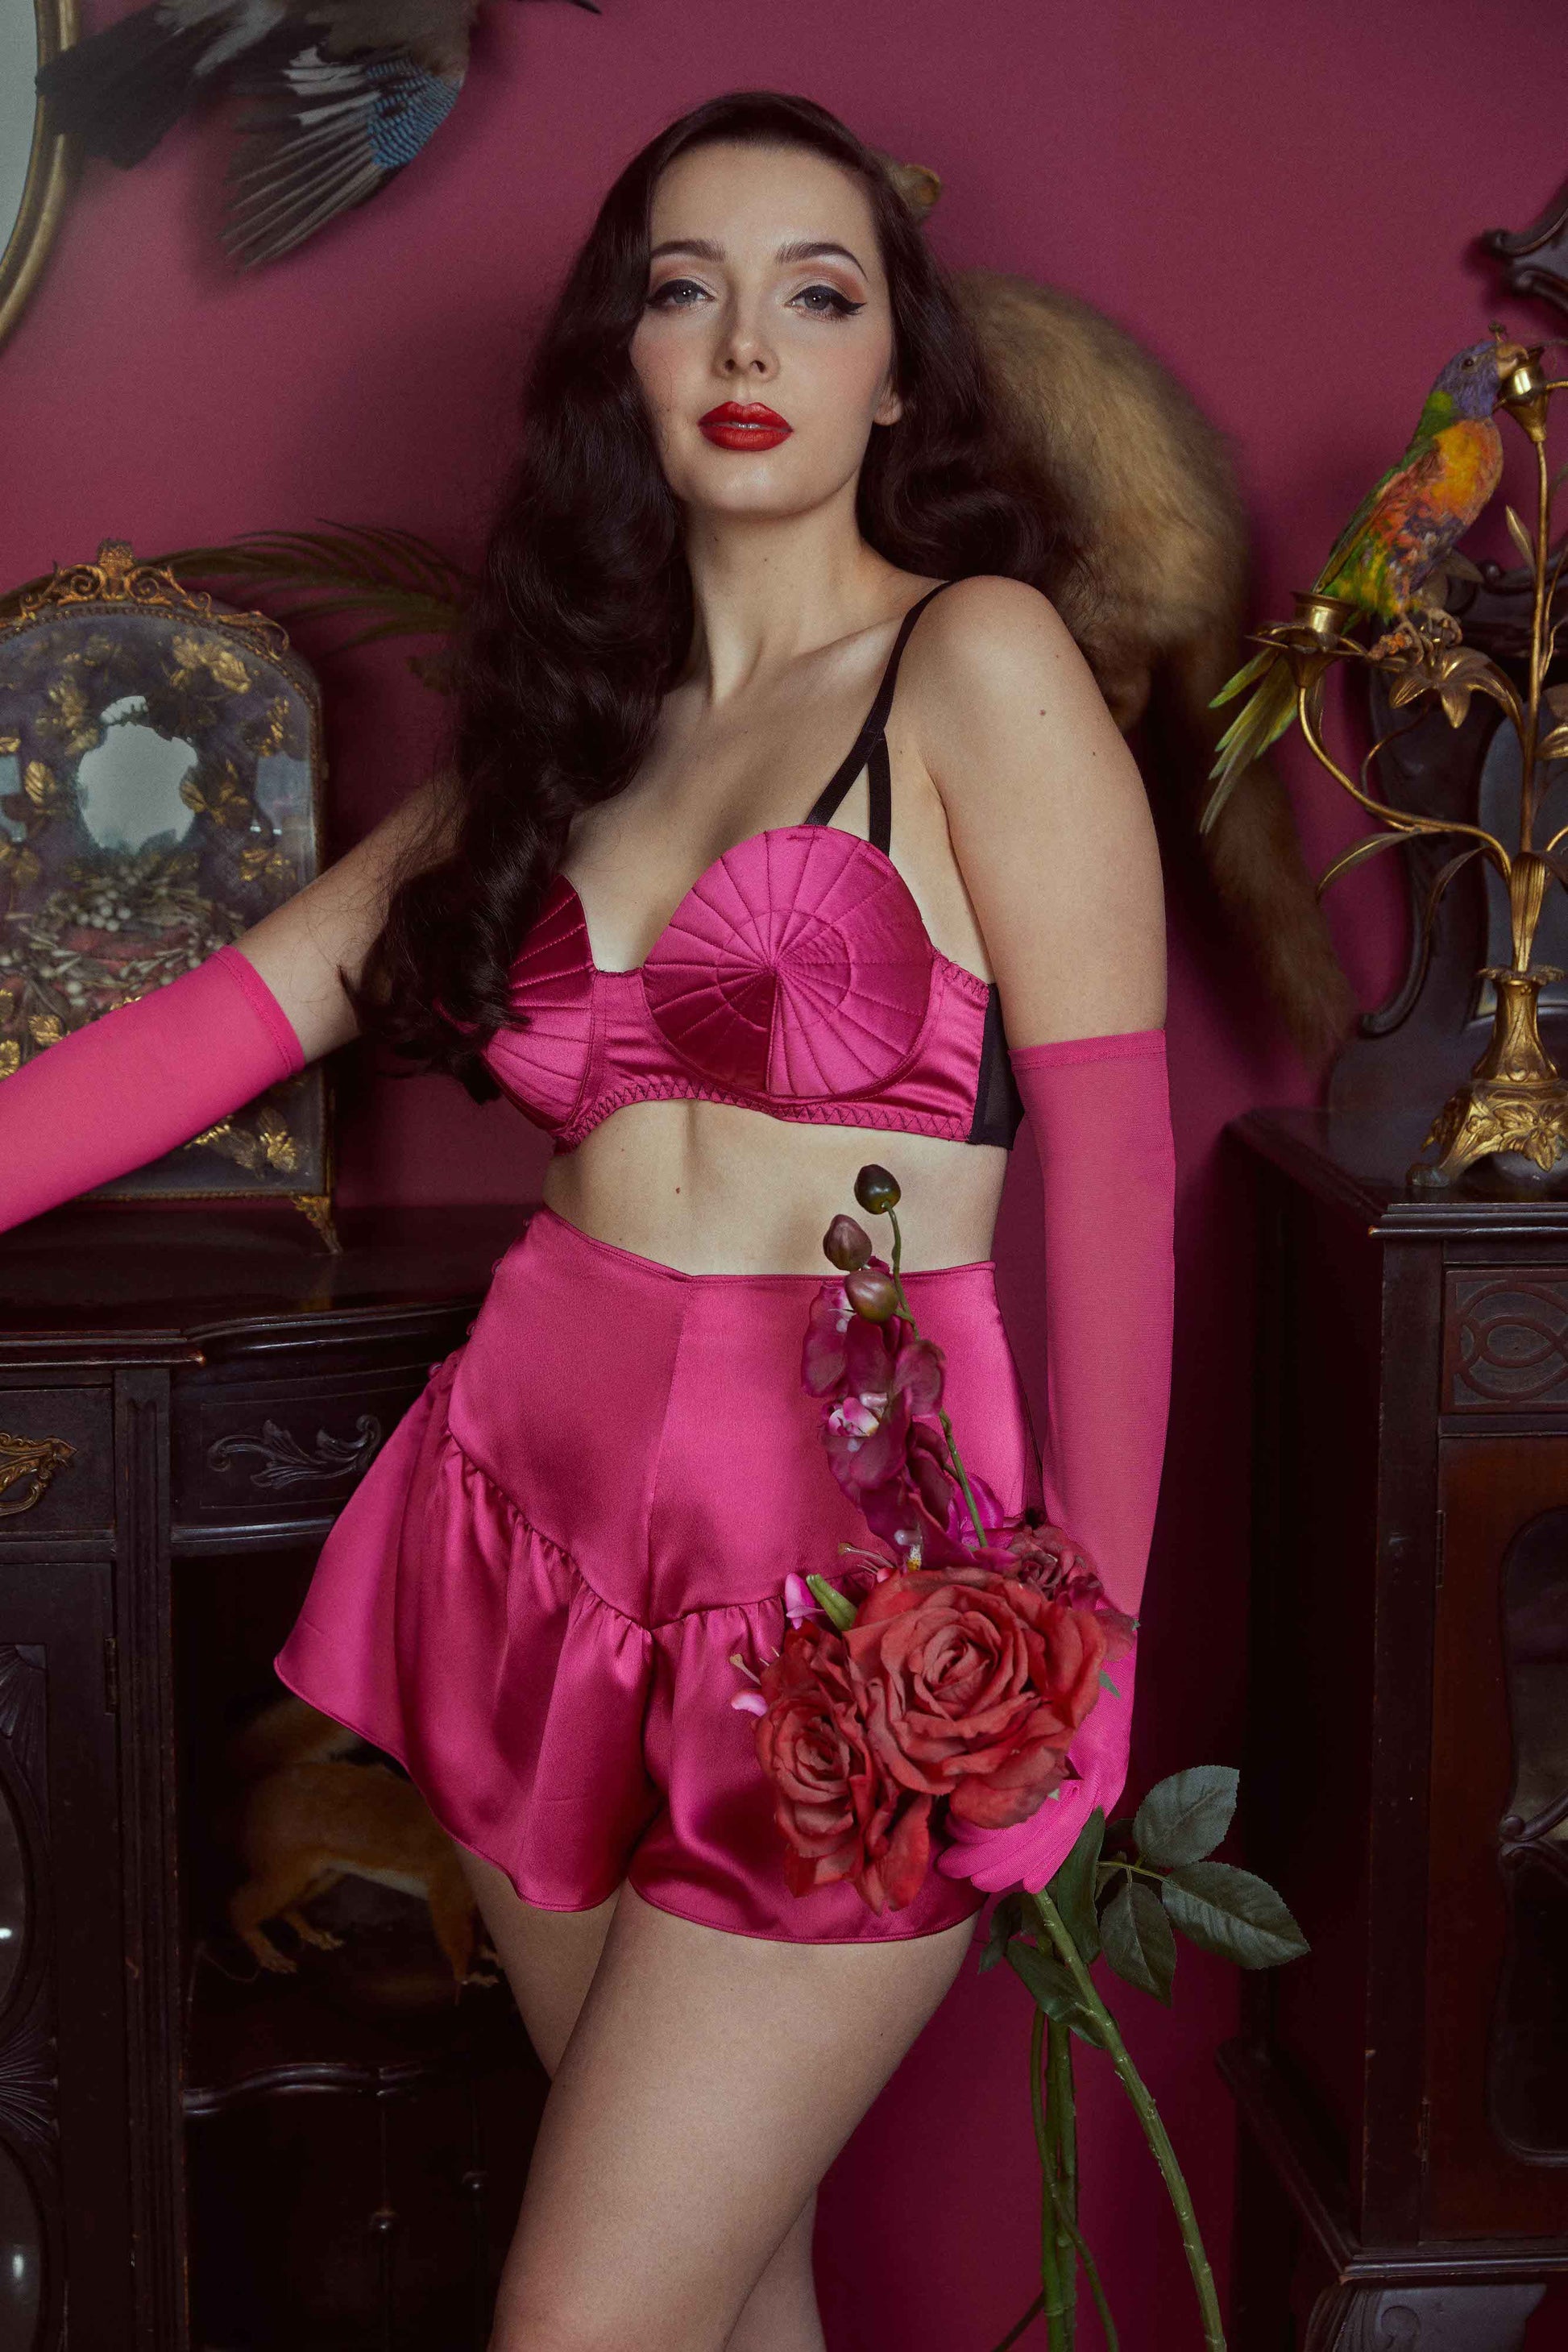 Shop for Pink, Knickers, Lingerie